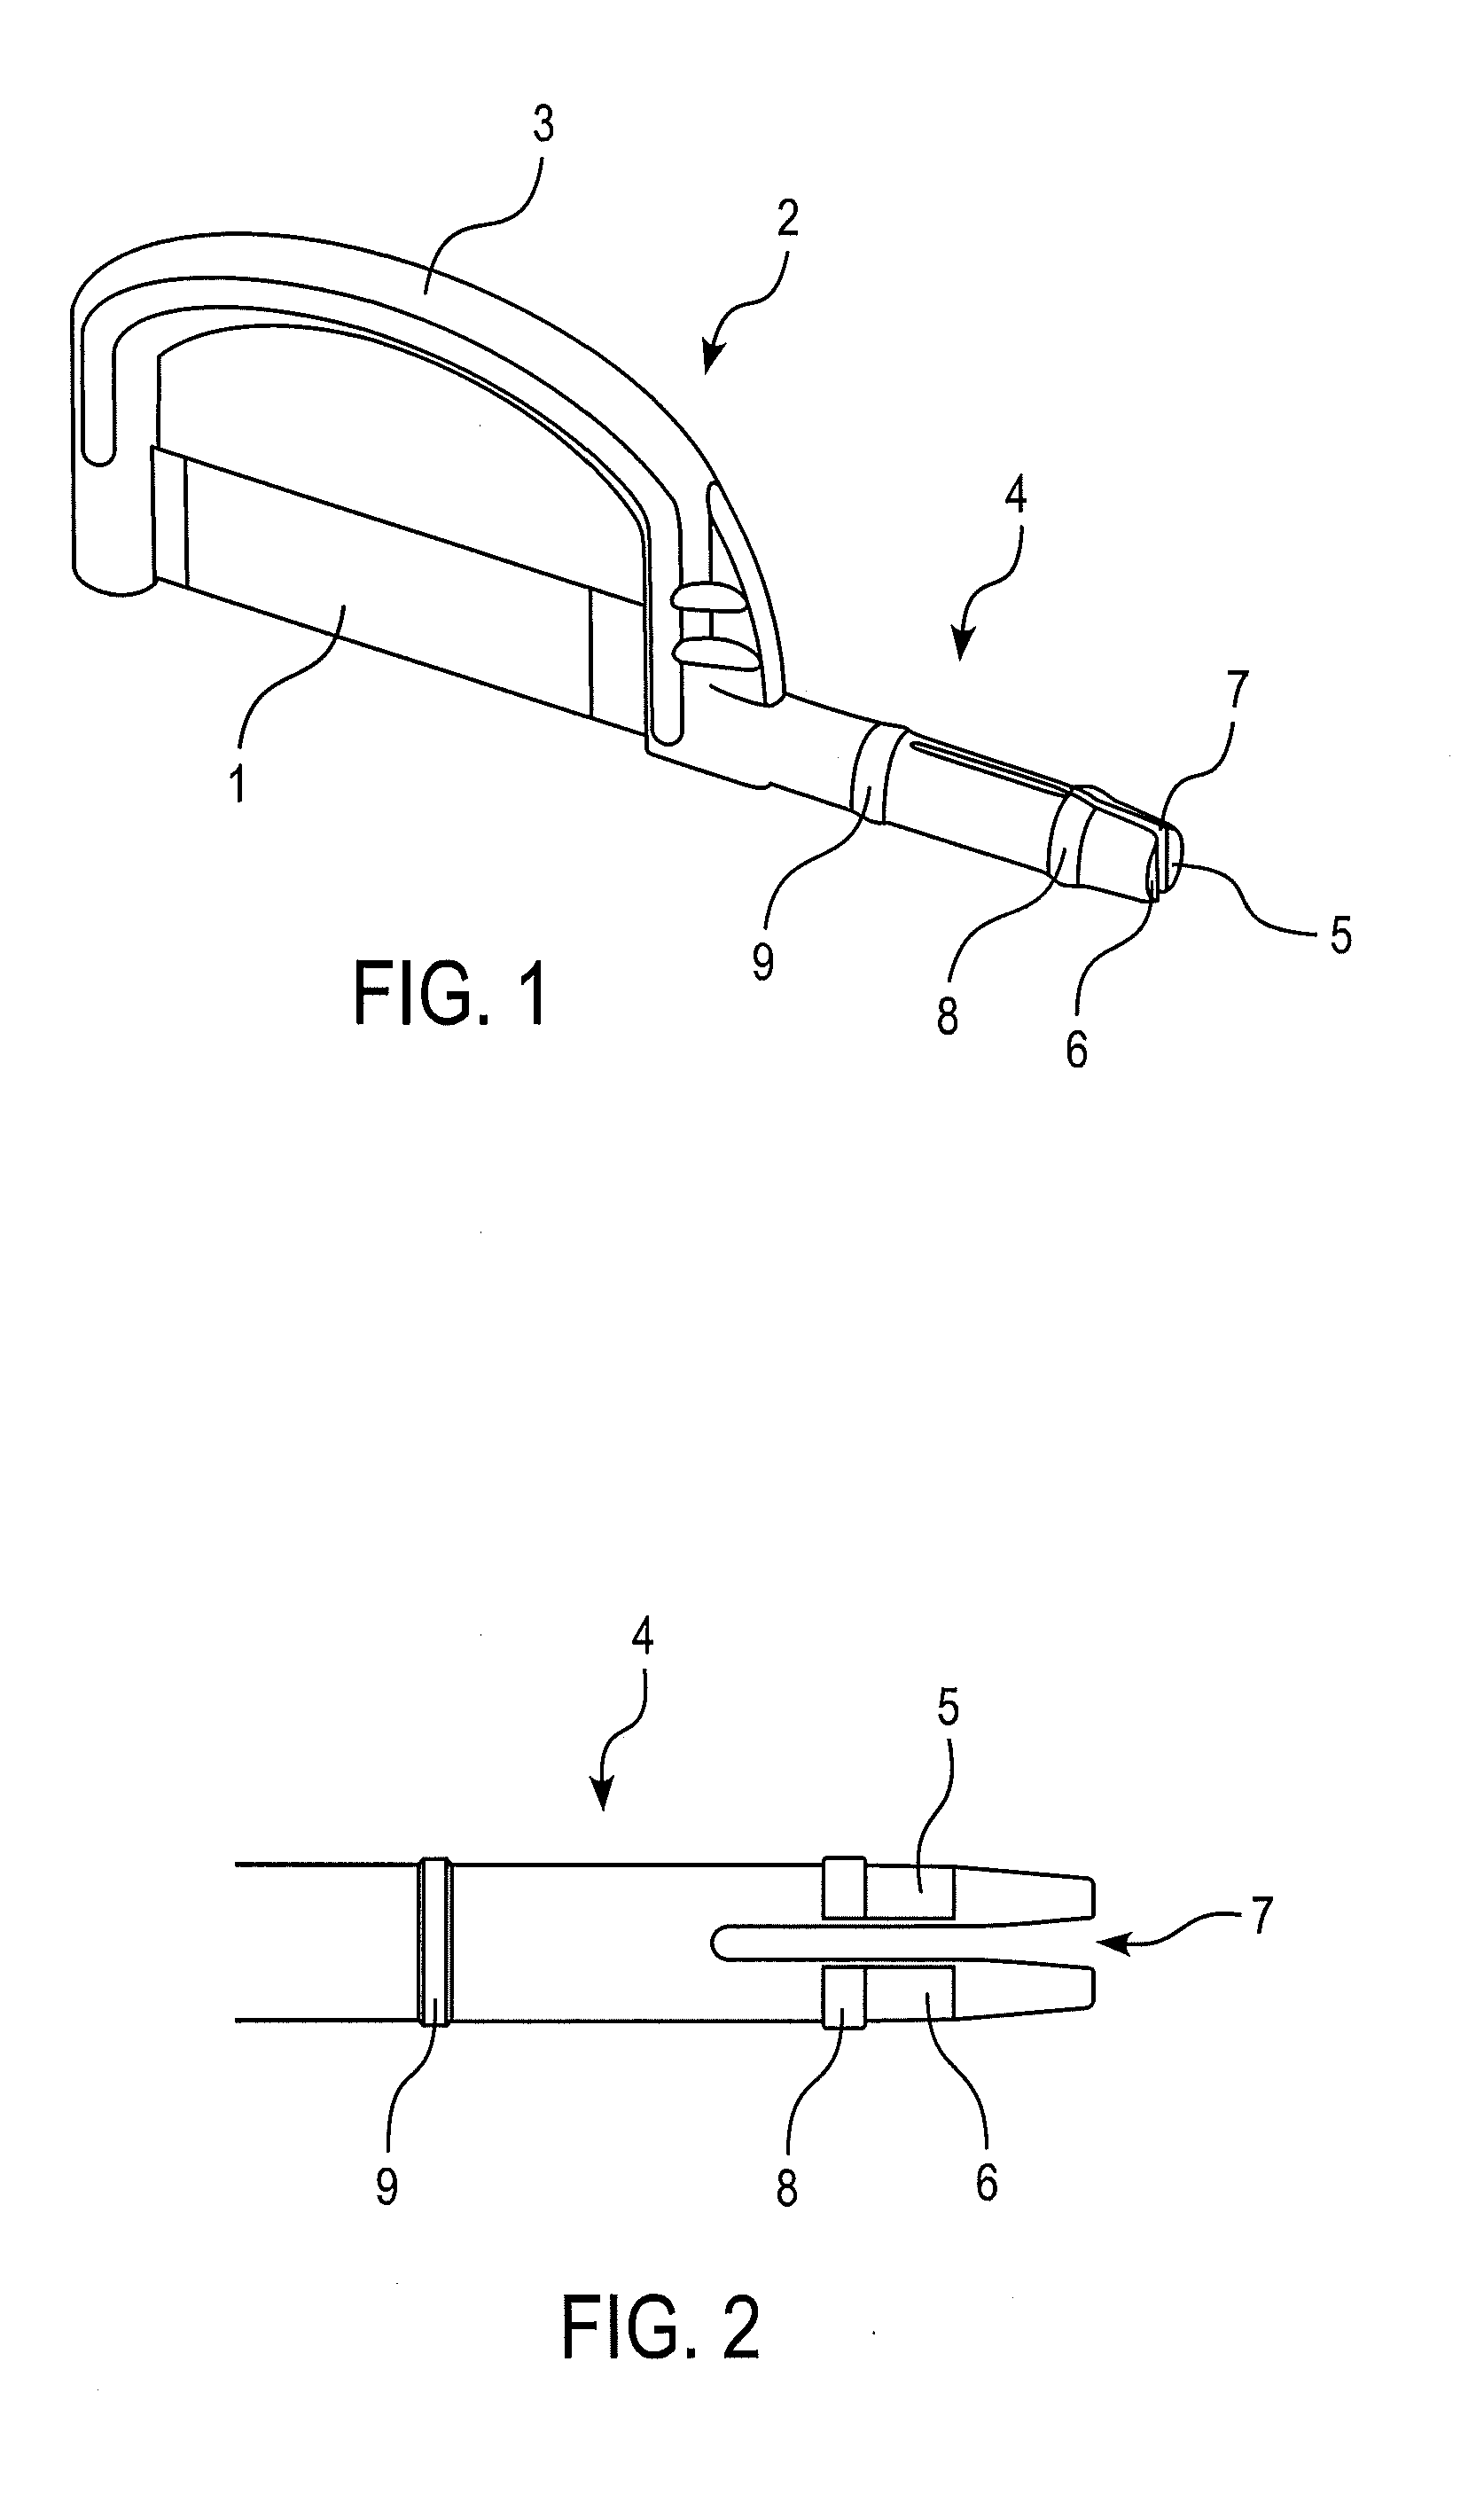 Apparatus for removing enamel or debris from a tooth